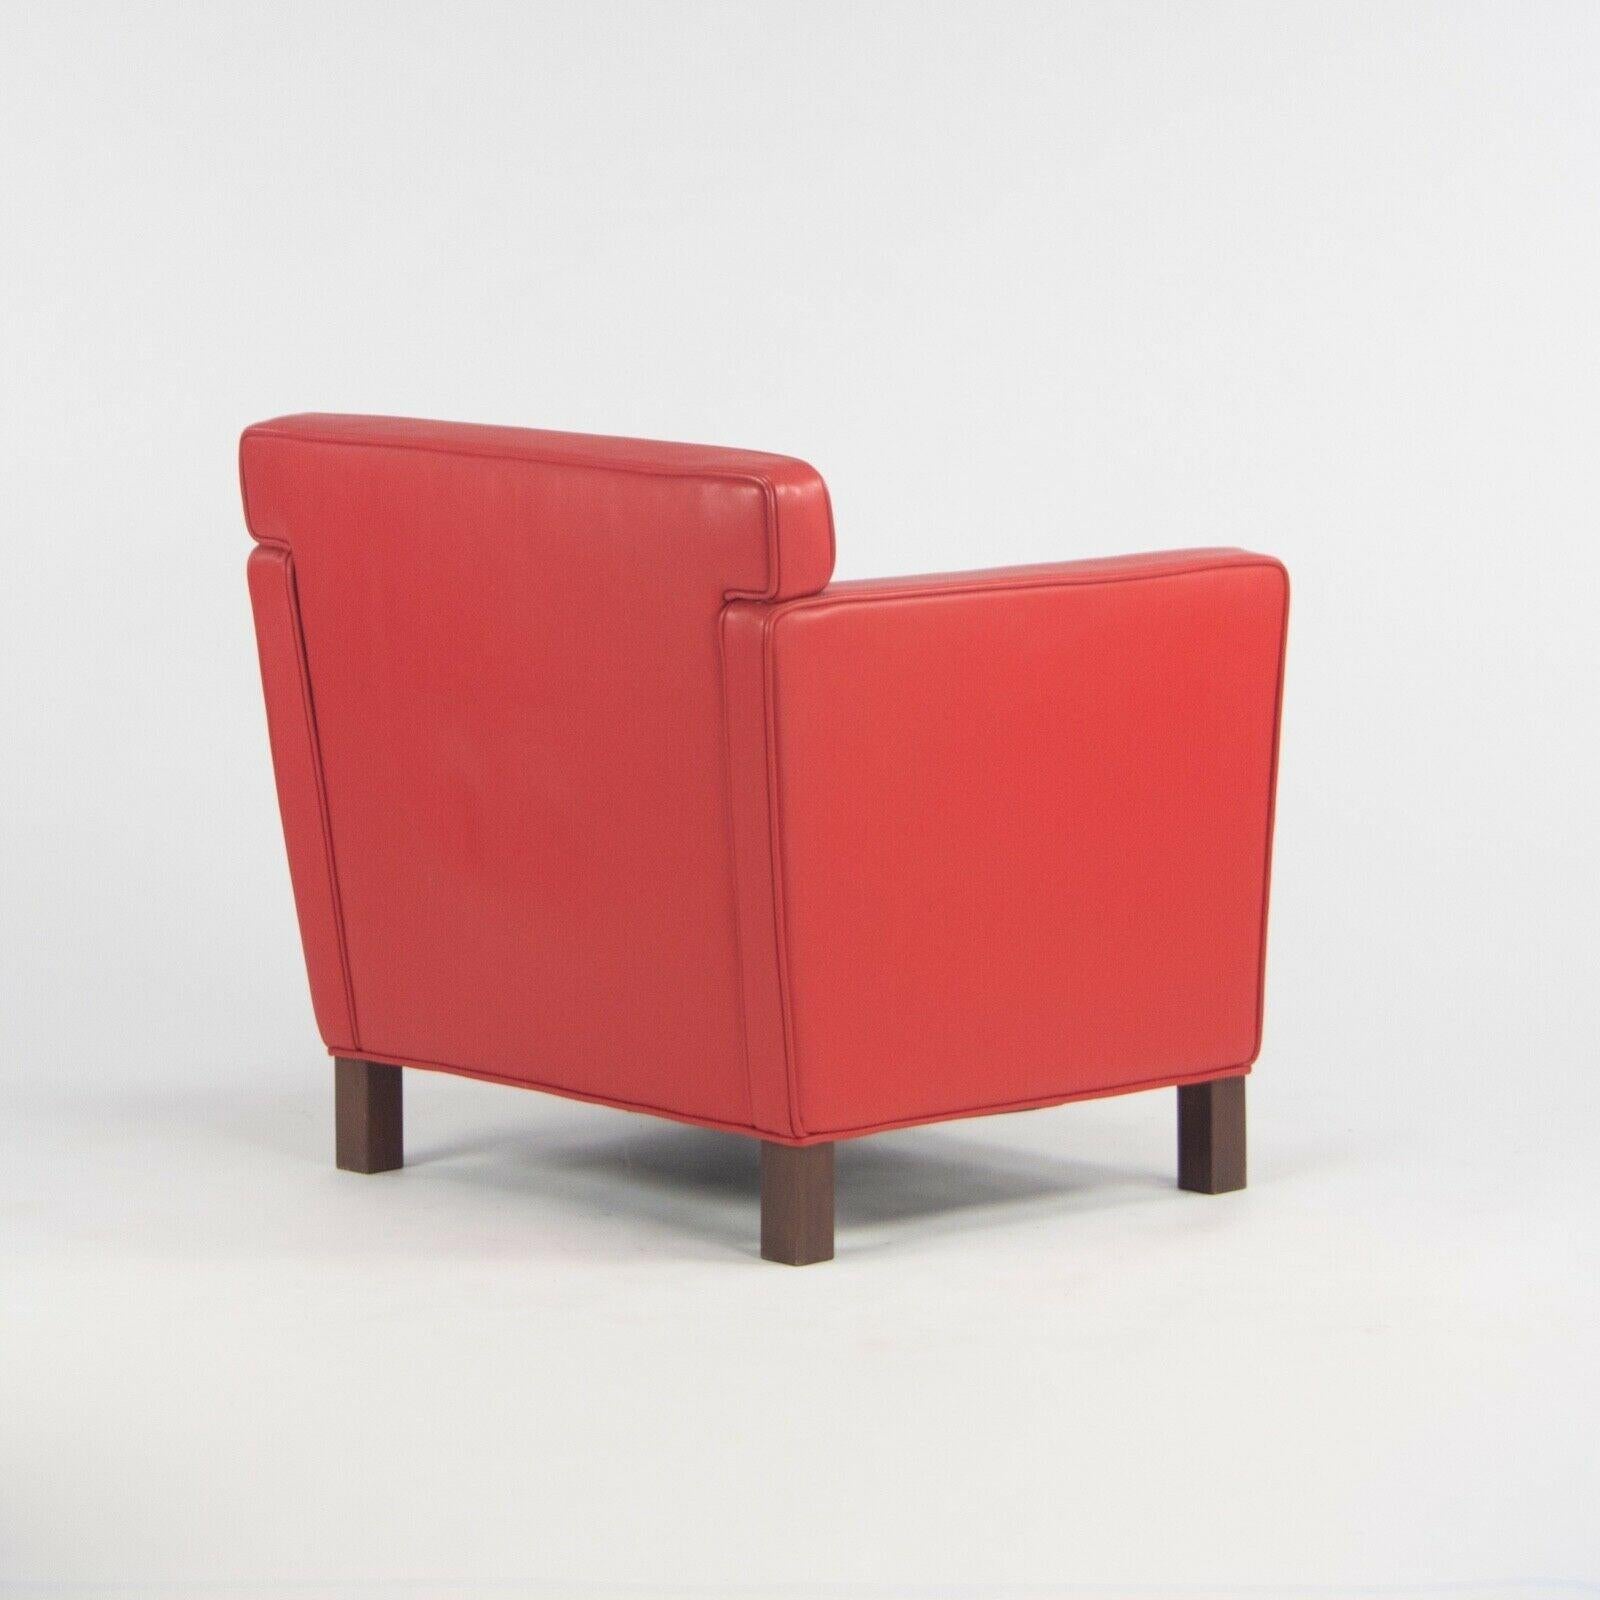 C. 2009 Pair of Mies Van Der Rohe Knoll Krefeld Lounge Chairs in Red Leather In Good Condition For Sale In Philadelphia, PA